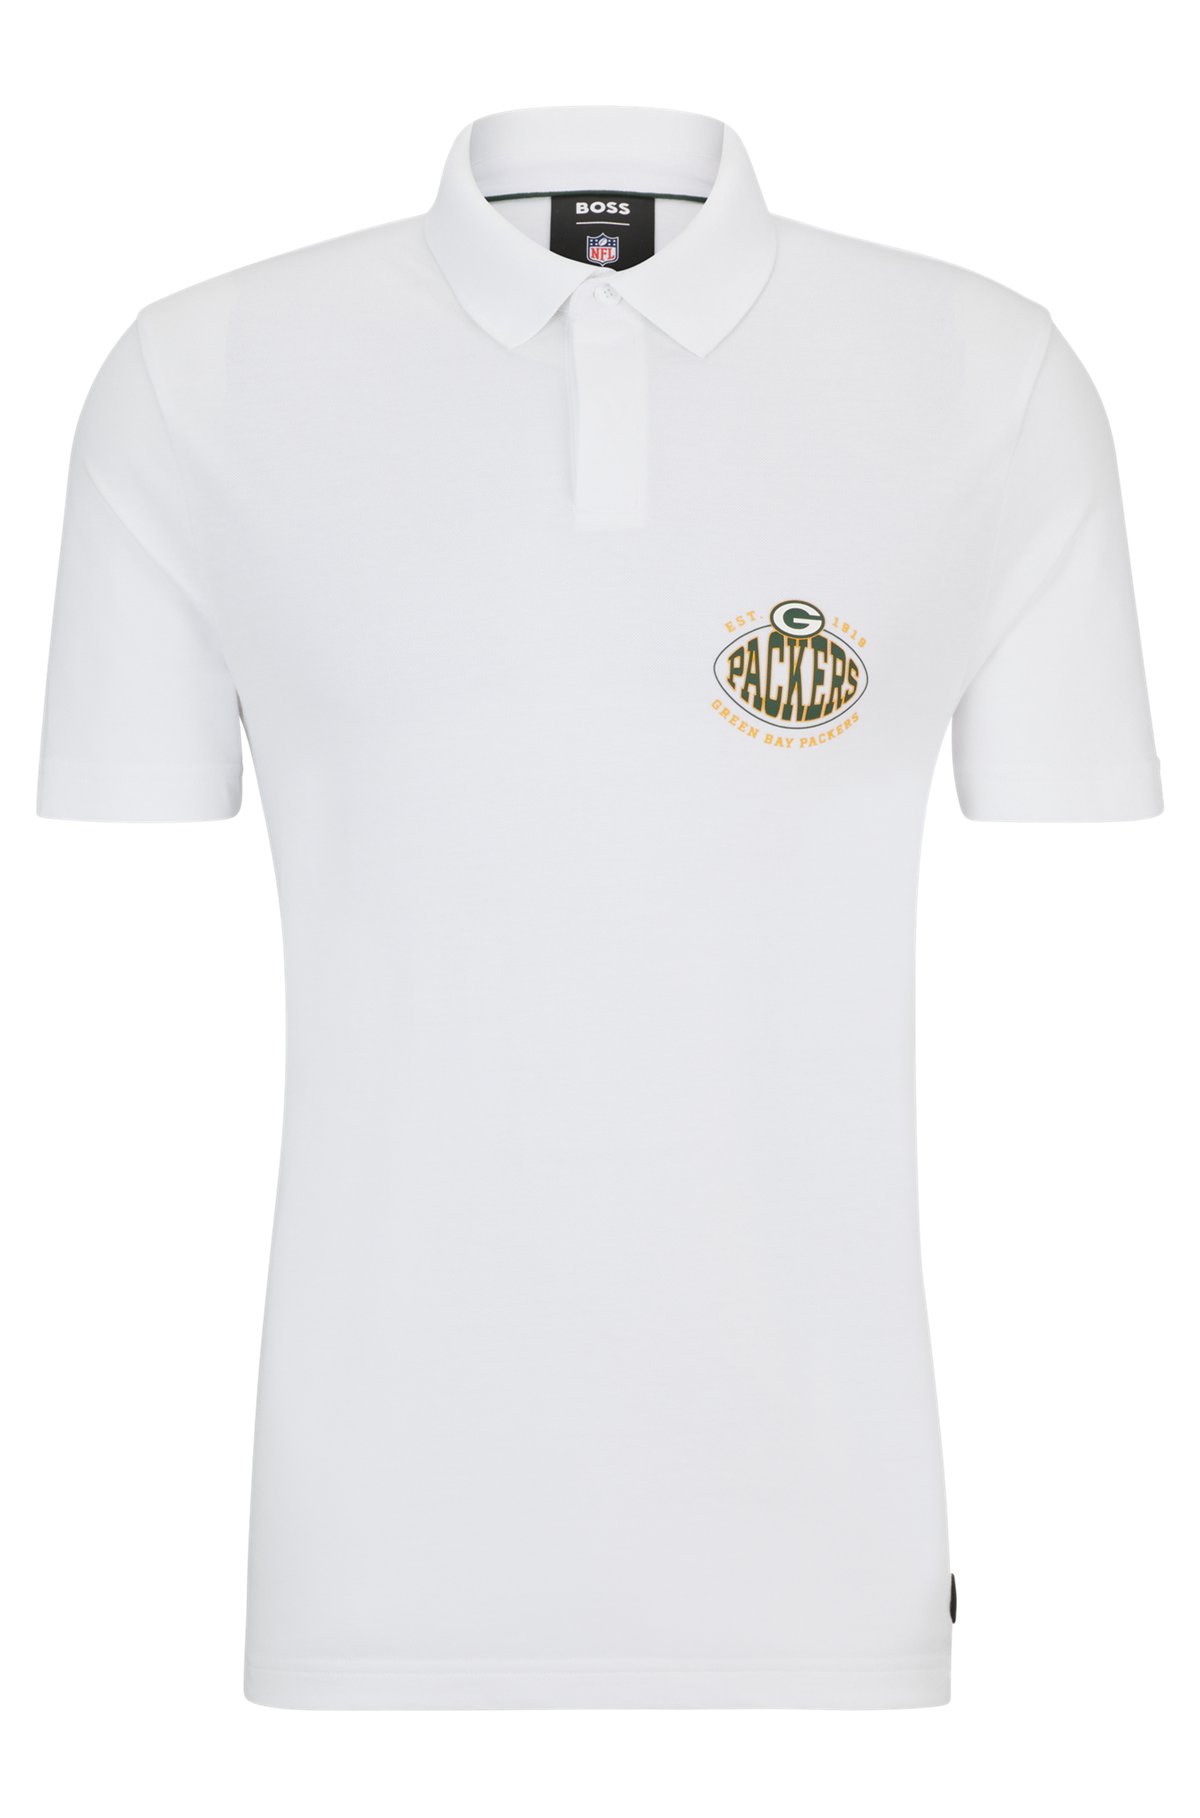 BOSS x NFL cotton-piqué polo shirt with collaborative branding, Packers